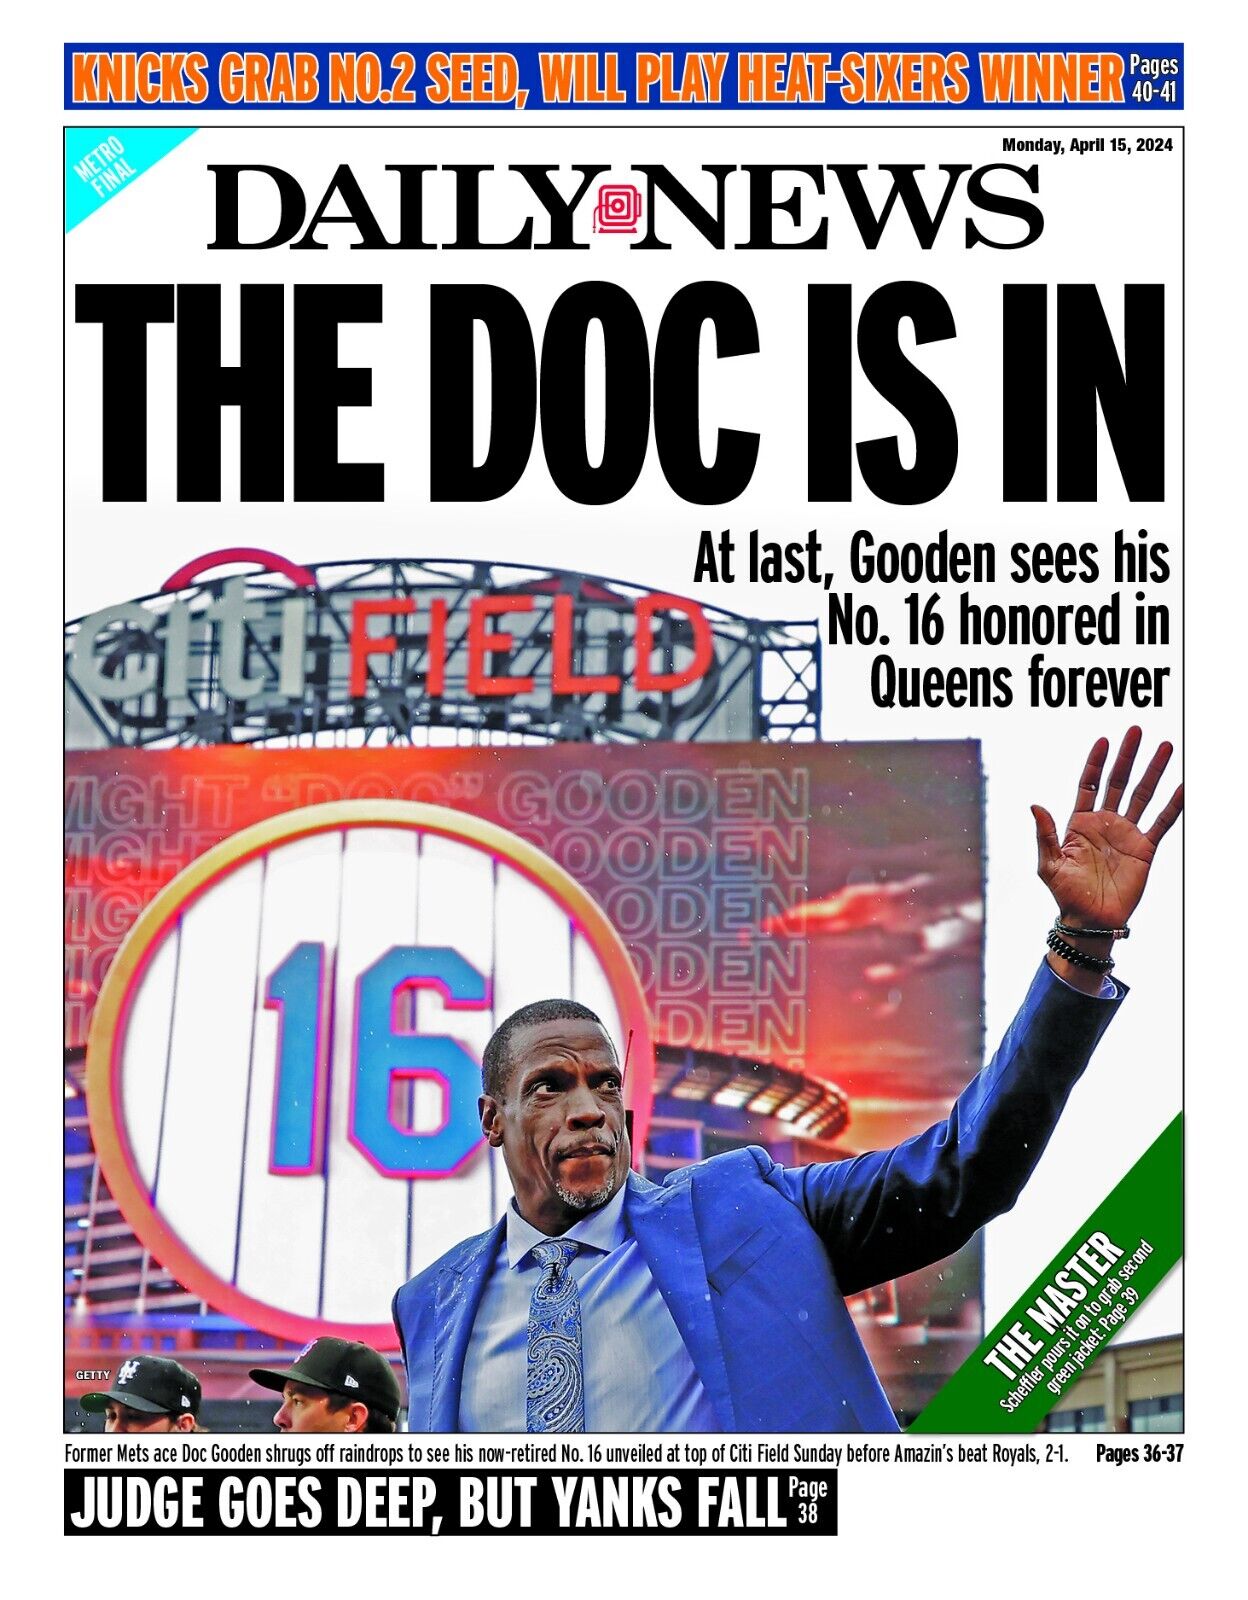 THE DOC IS IN DWIGHT GOODEN METS HALL OF FAME NY DAILY NEWS 4/15 2024